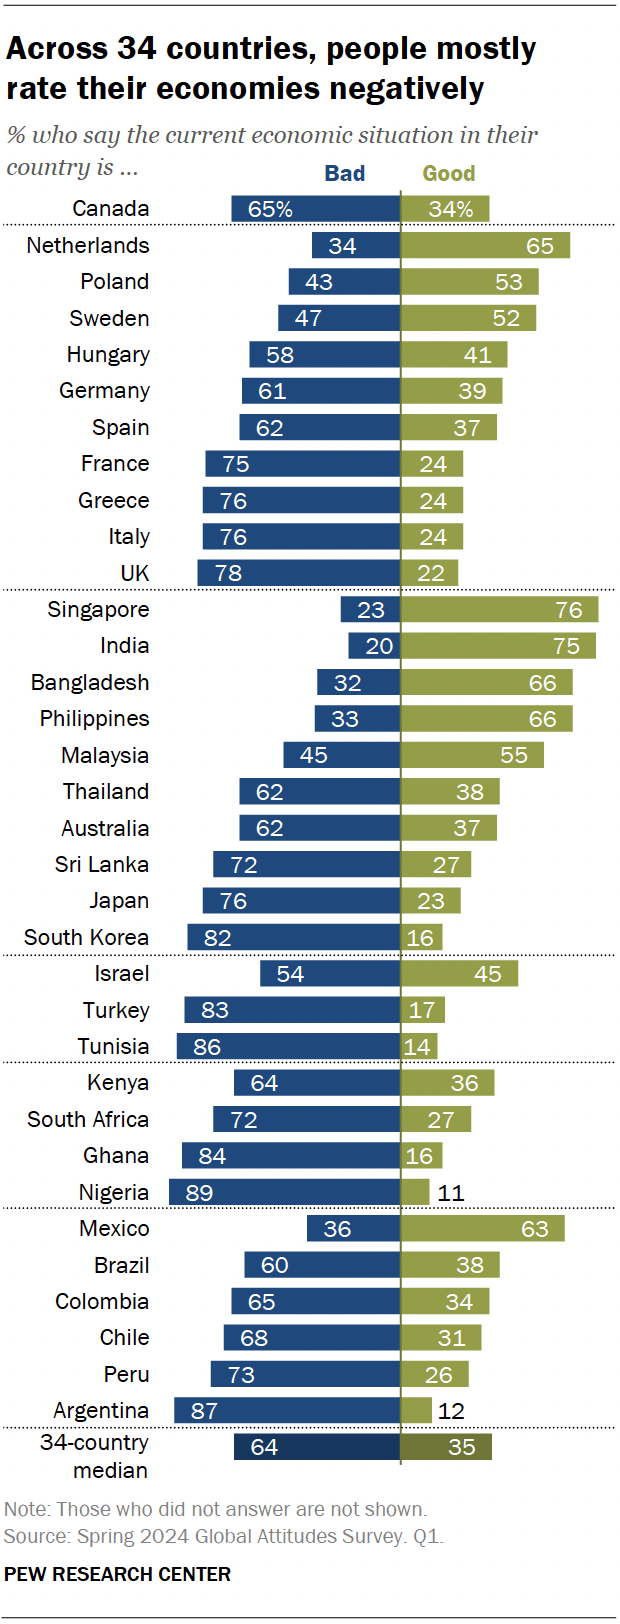 A diverging bar chart showing that, across 34 countries, people mostly rate their economies negatively.